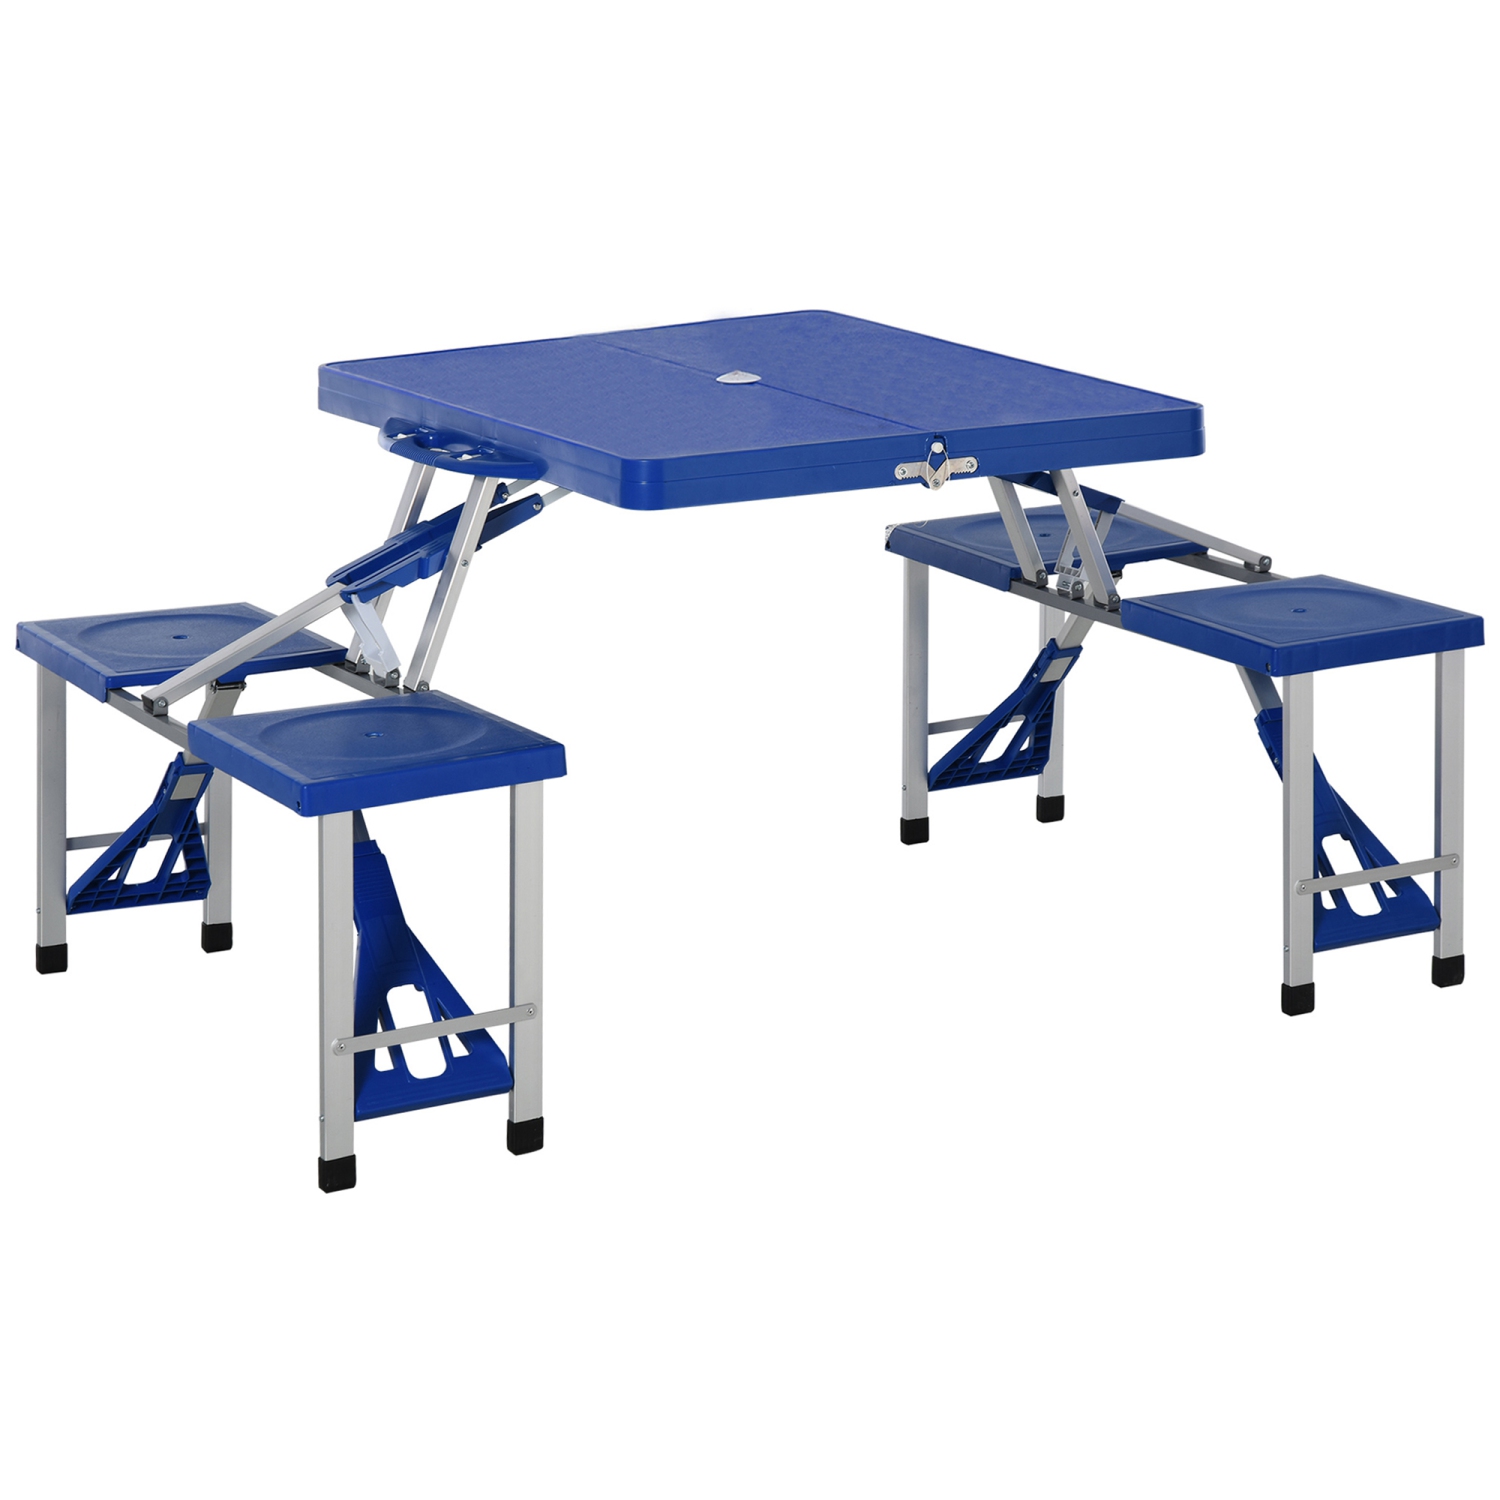 Outsunny Outdoor Folding Table with Sink and Faucet Organized